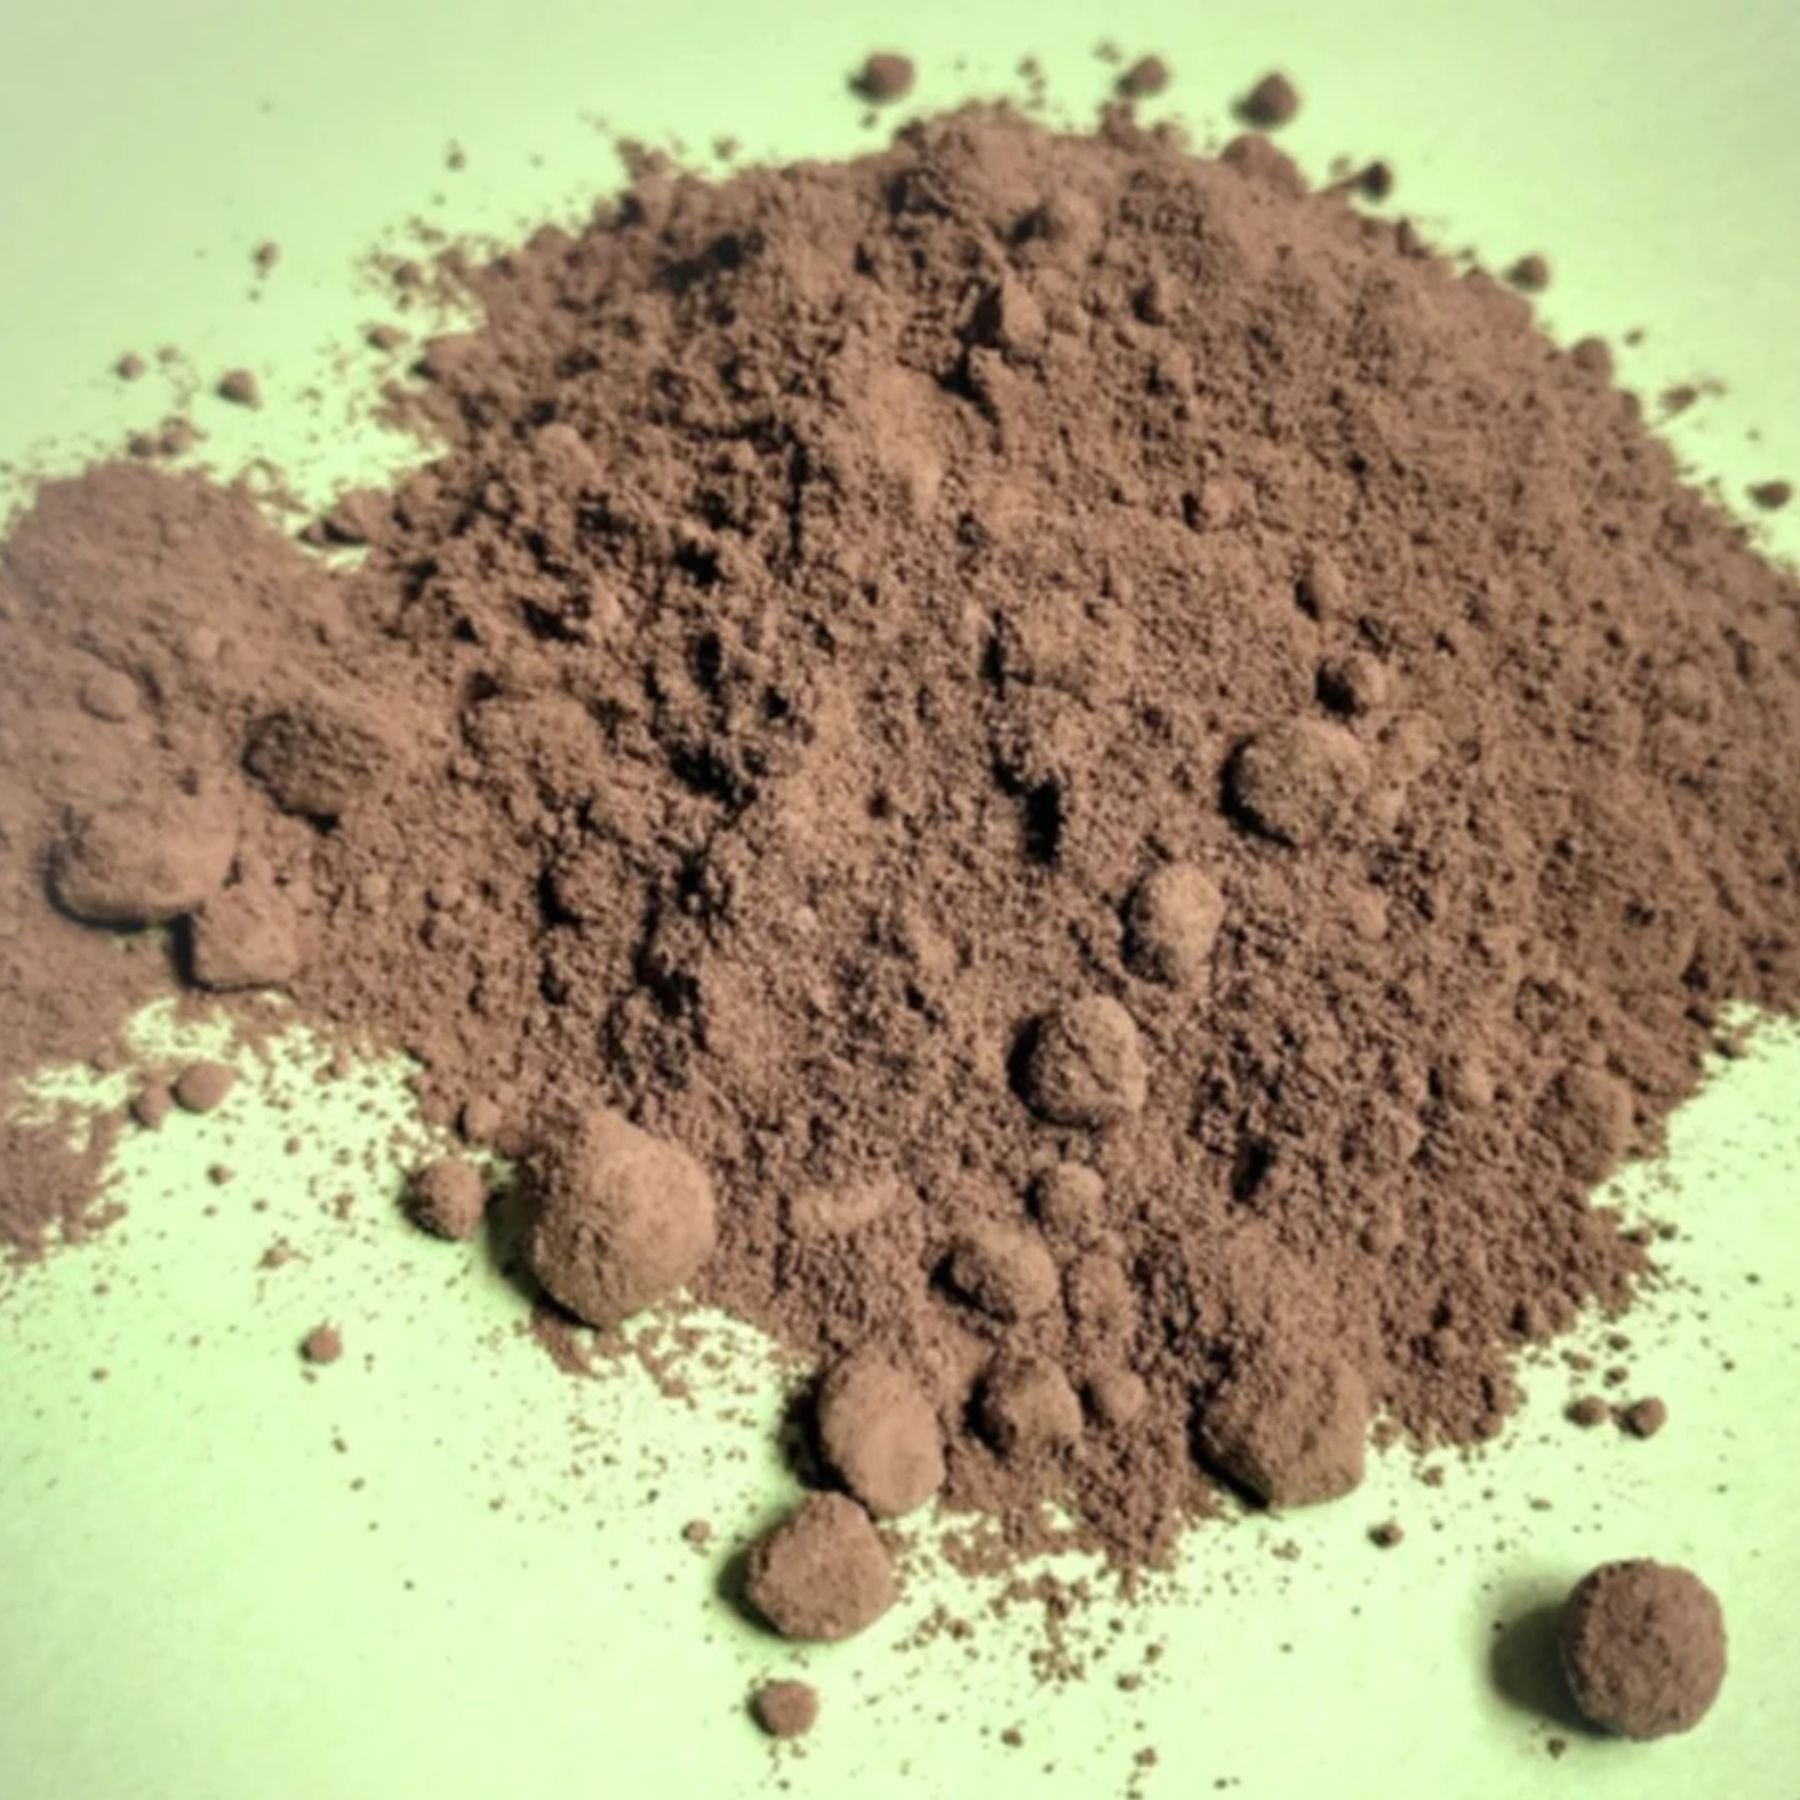 Cocoa Supply Single Origin-Made Cacao Powder from Ecuador. Dutched Alkalized or Natural, USDA Organic or Conventional, lowfat and high fat content